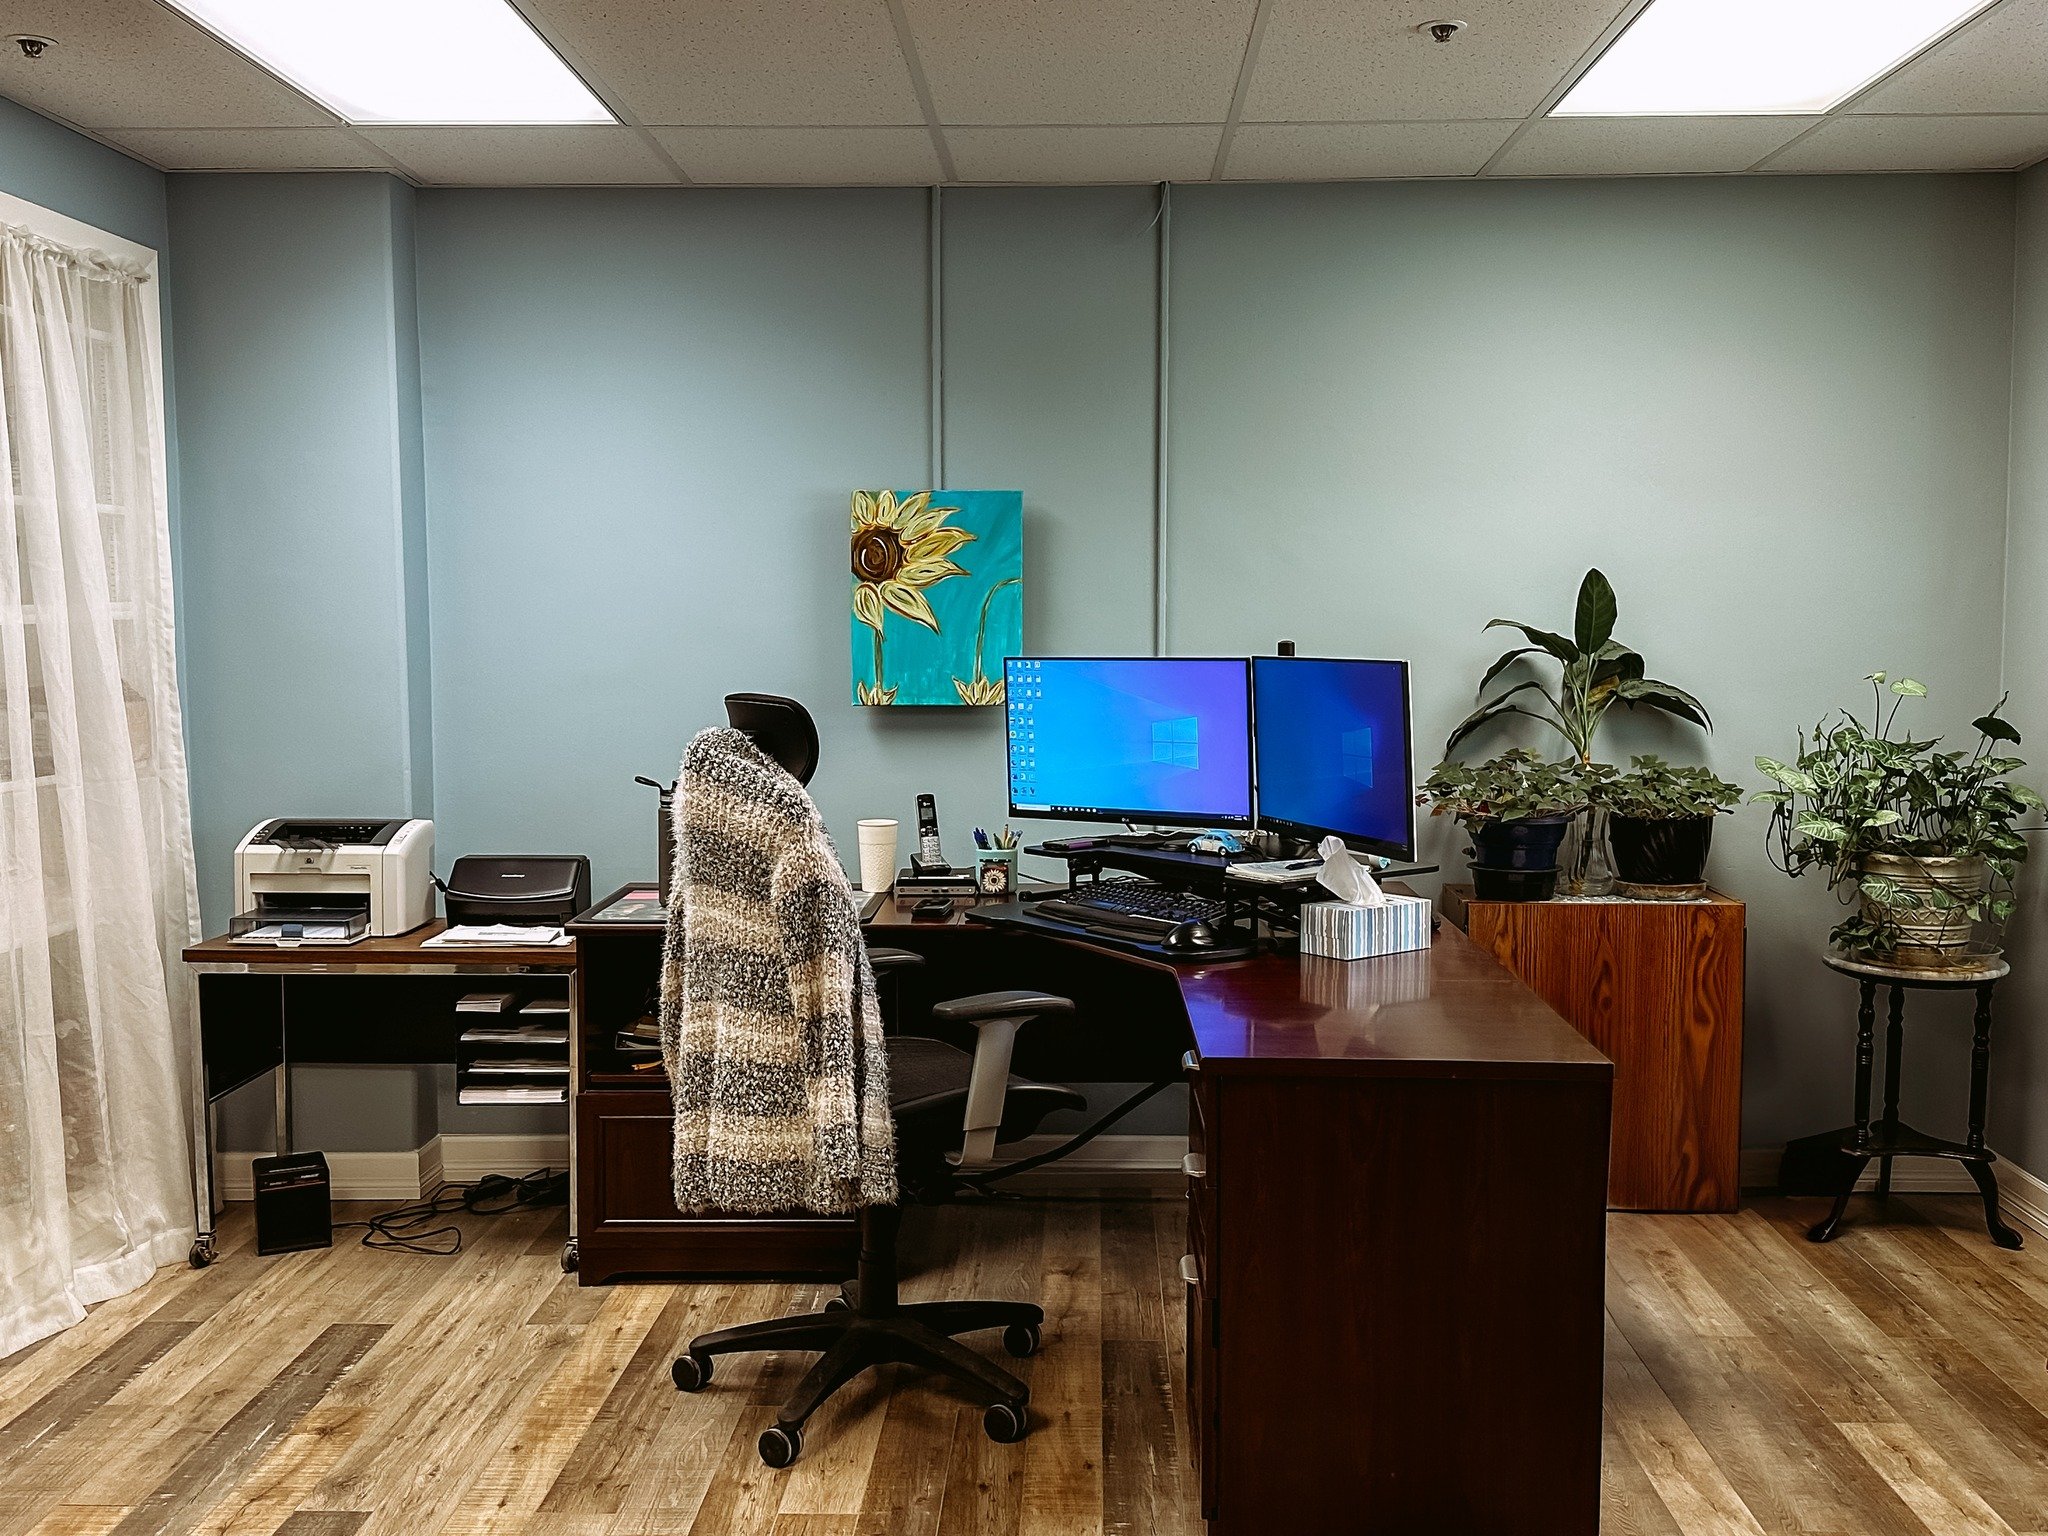 We still have some beautiful office spaces available for rent in the Community Service Center!!
Call us at 406-563-5538 to see available offices! ✨

Frazier &amp; Co. Photography